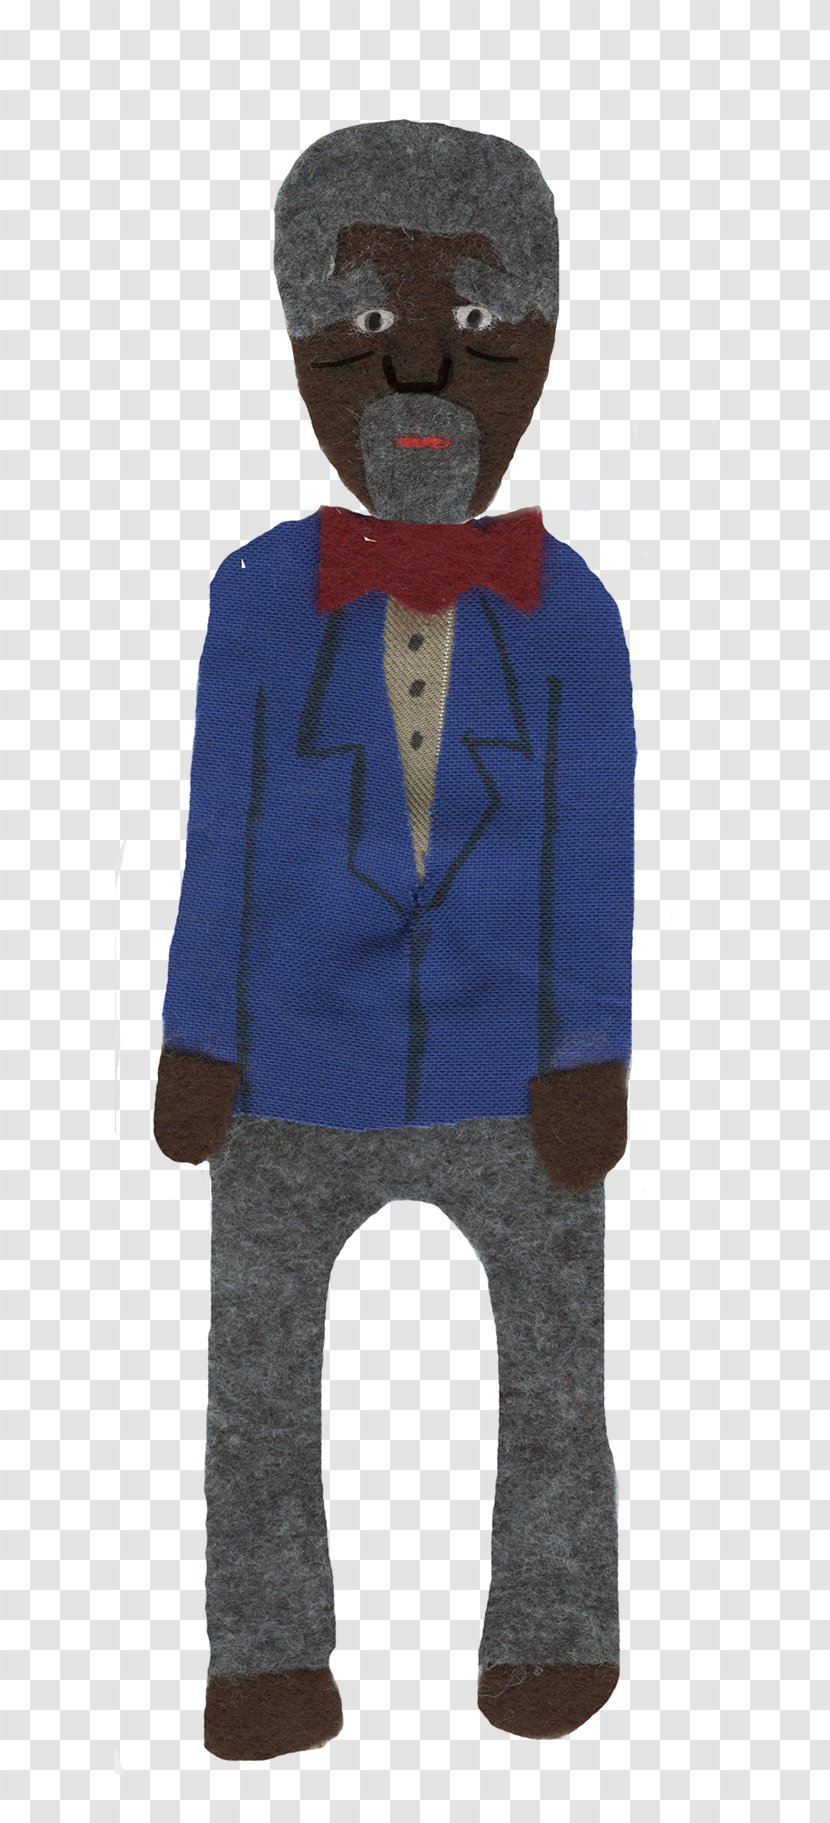 Outerwear Character - Costume - Wes Anderson Transparent PNG